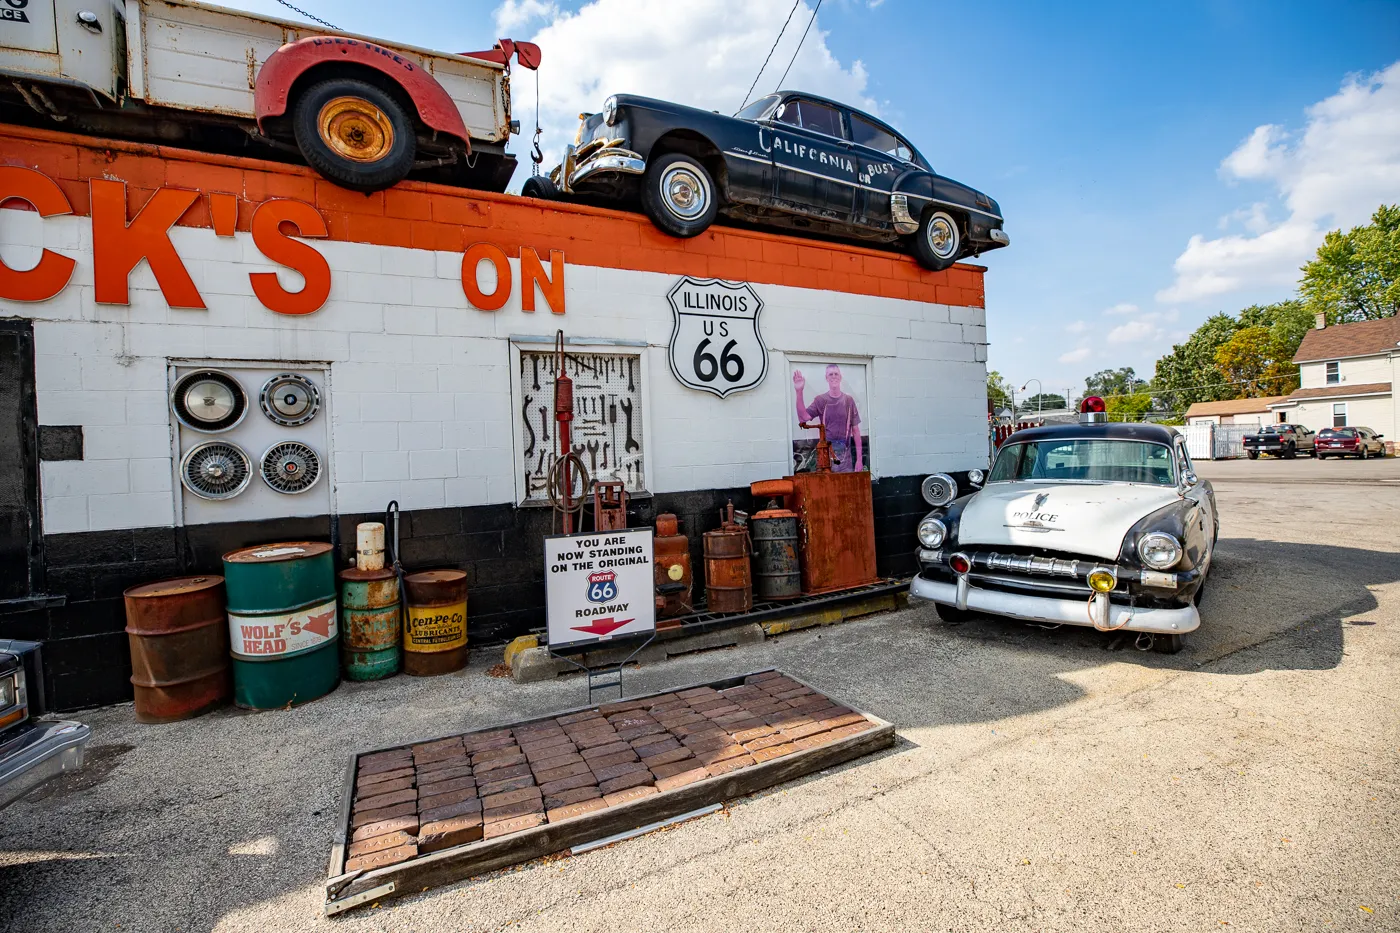 Dick's on 66 - Dick's Towing in Joliet, Illinois Route 66 Attraction